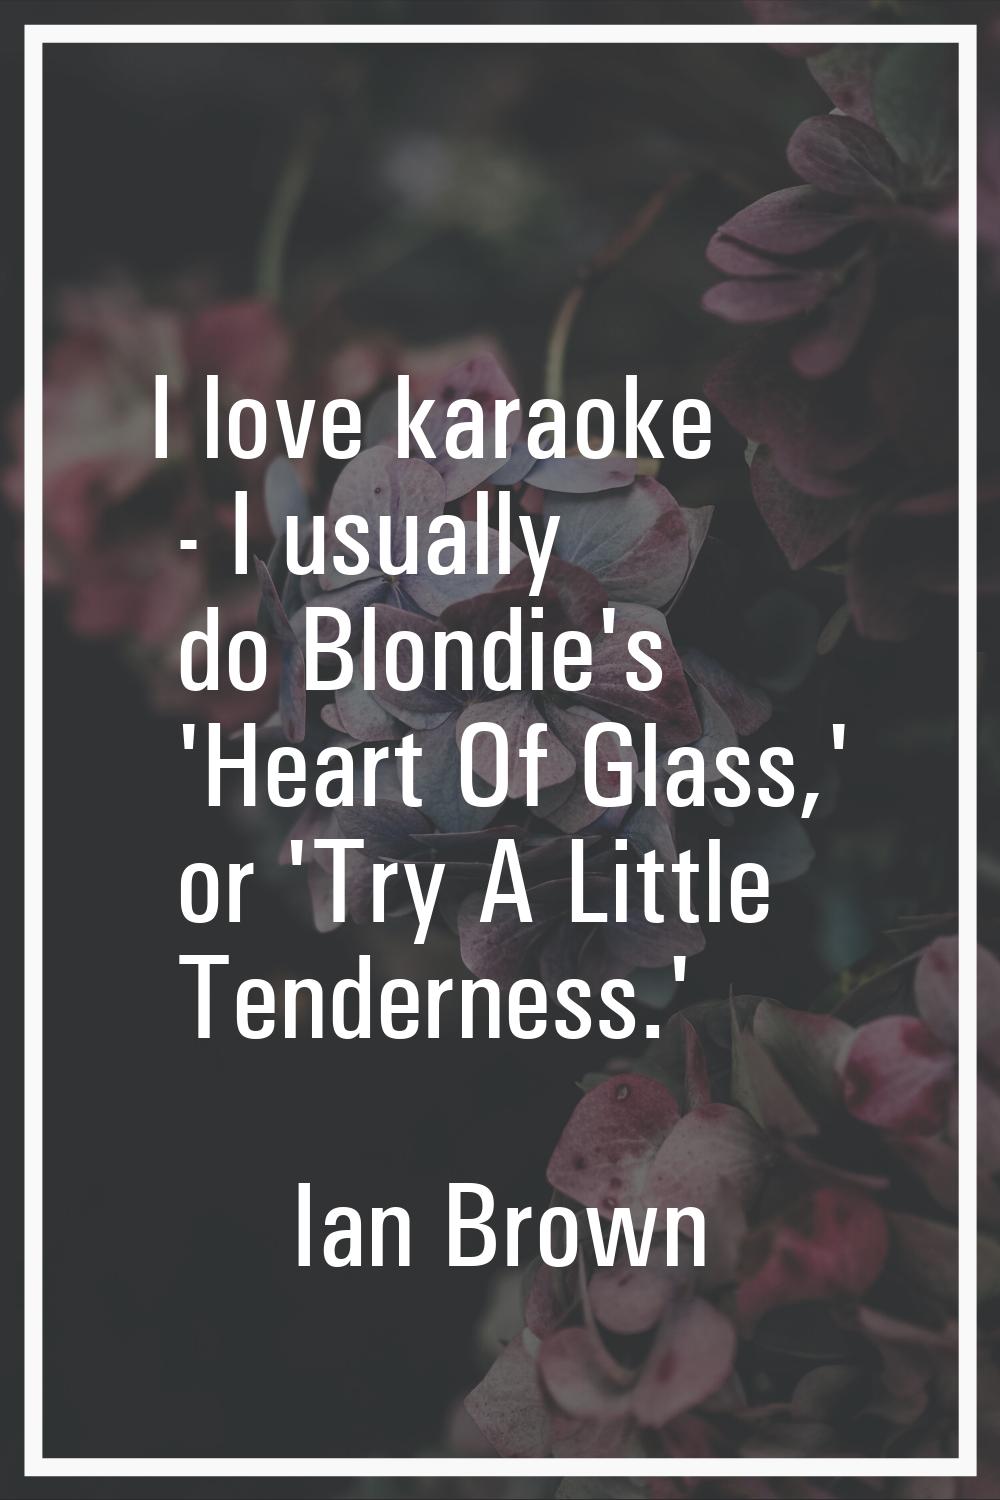 I love karaoke - I usually do Blondie's 'Heart Of Glass,' or 'Try A Little Tenderness.'